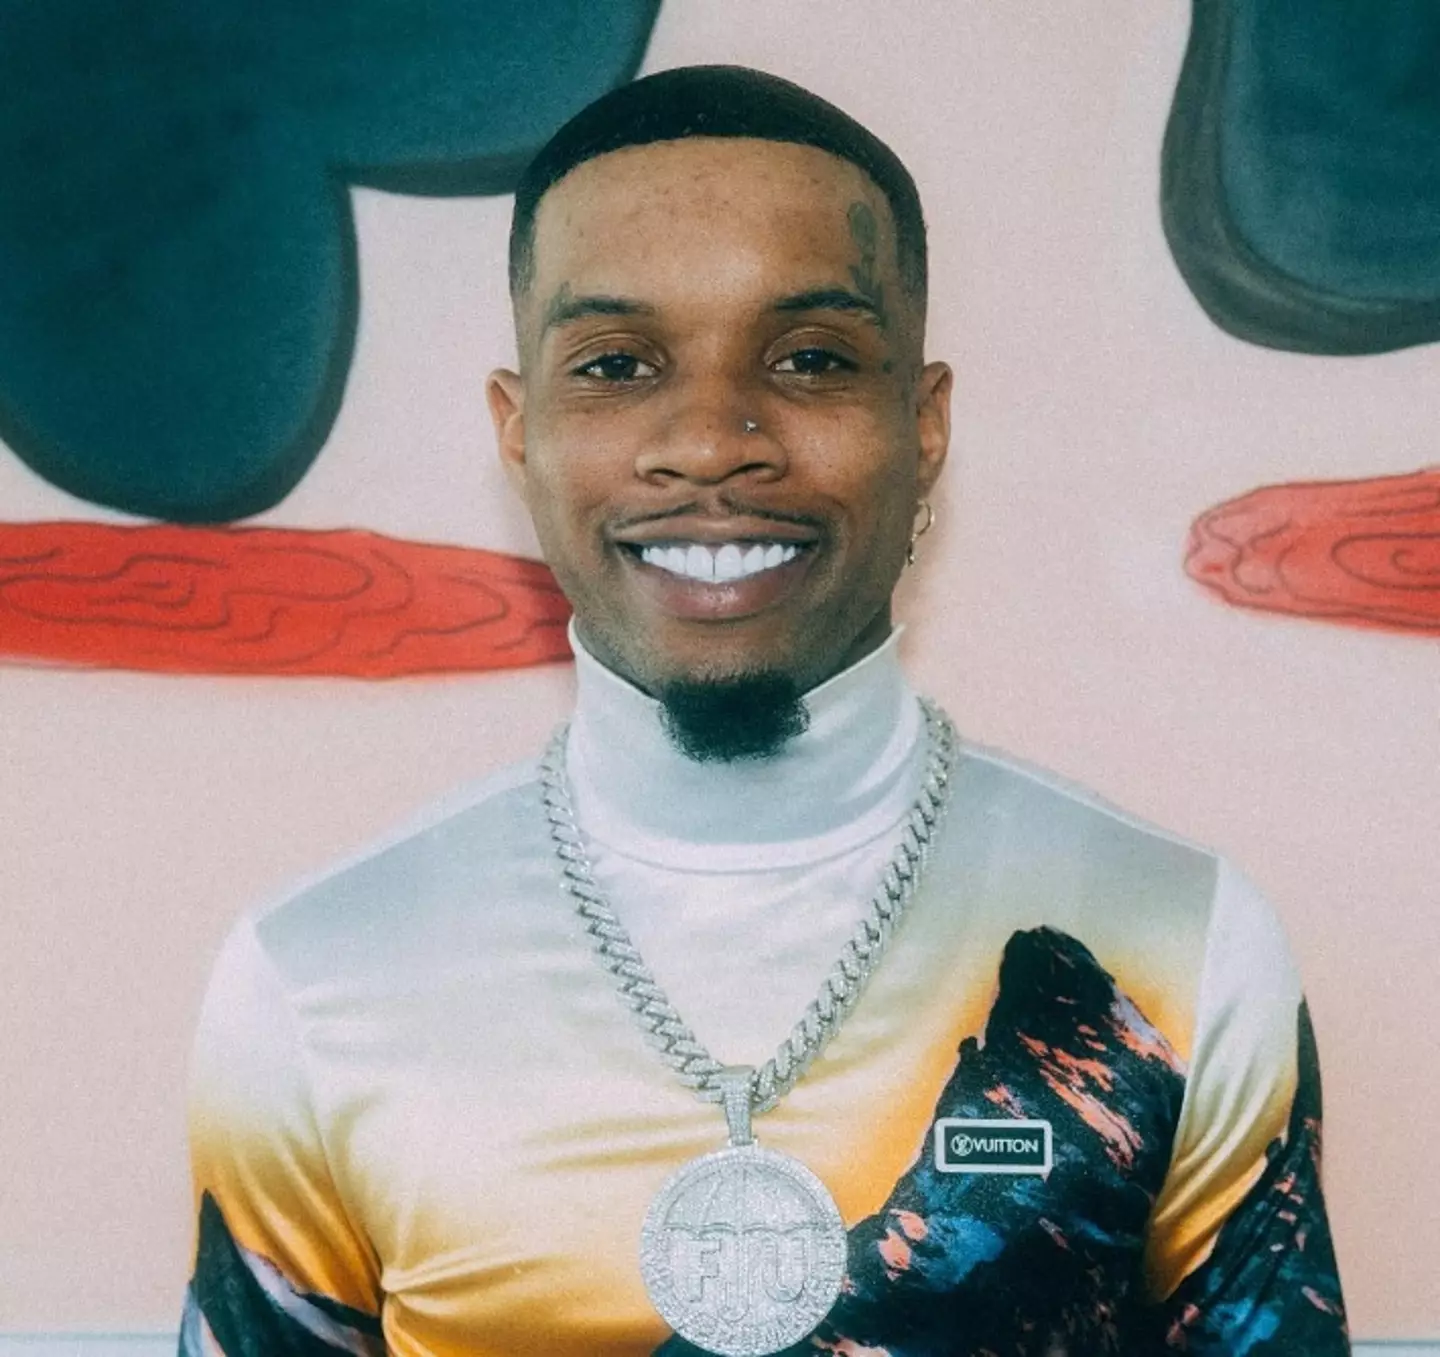 Tory Lanez remains defiant after the trial.